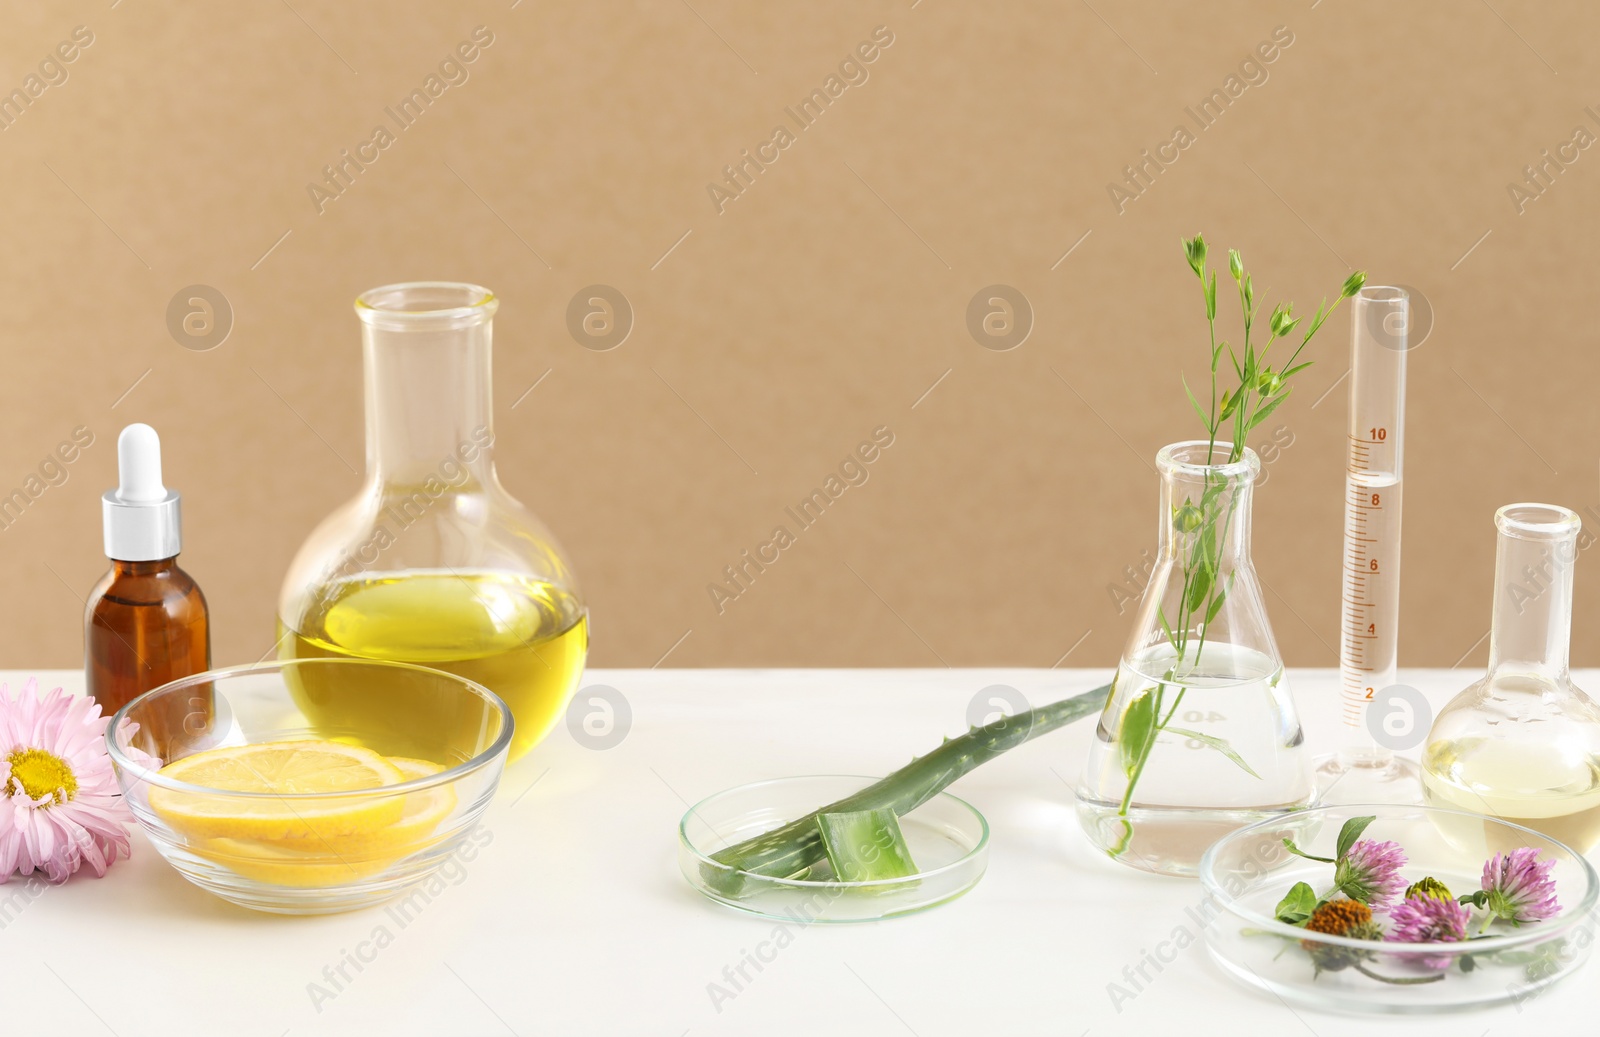 Photo of Developing cosmetic oil. Laboratory glassware and flowers on white table